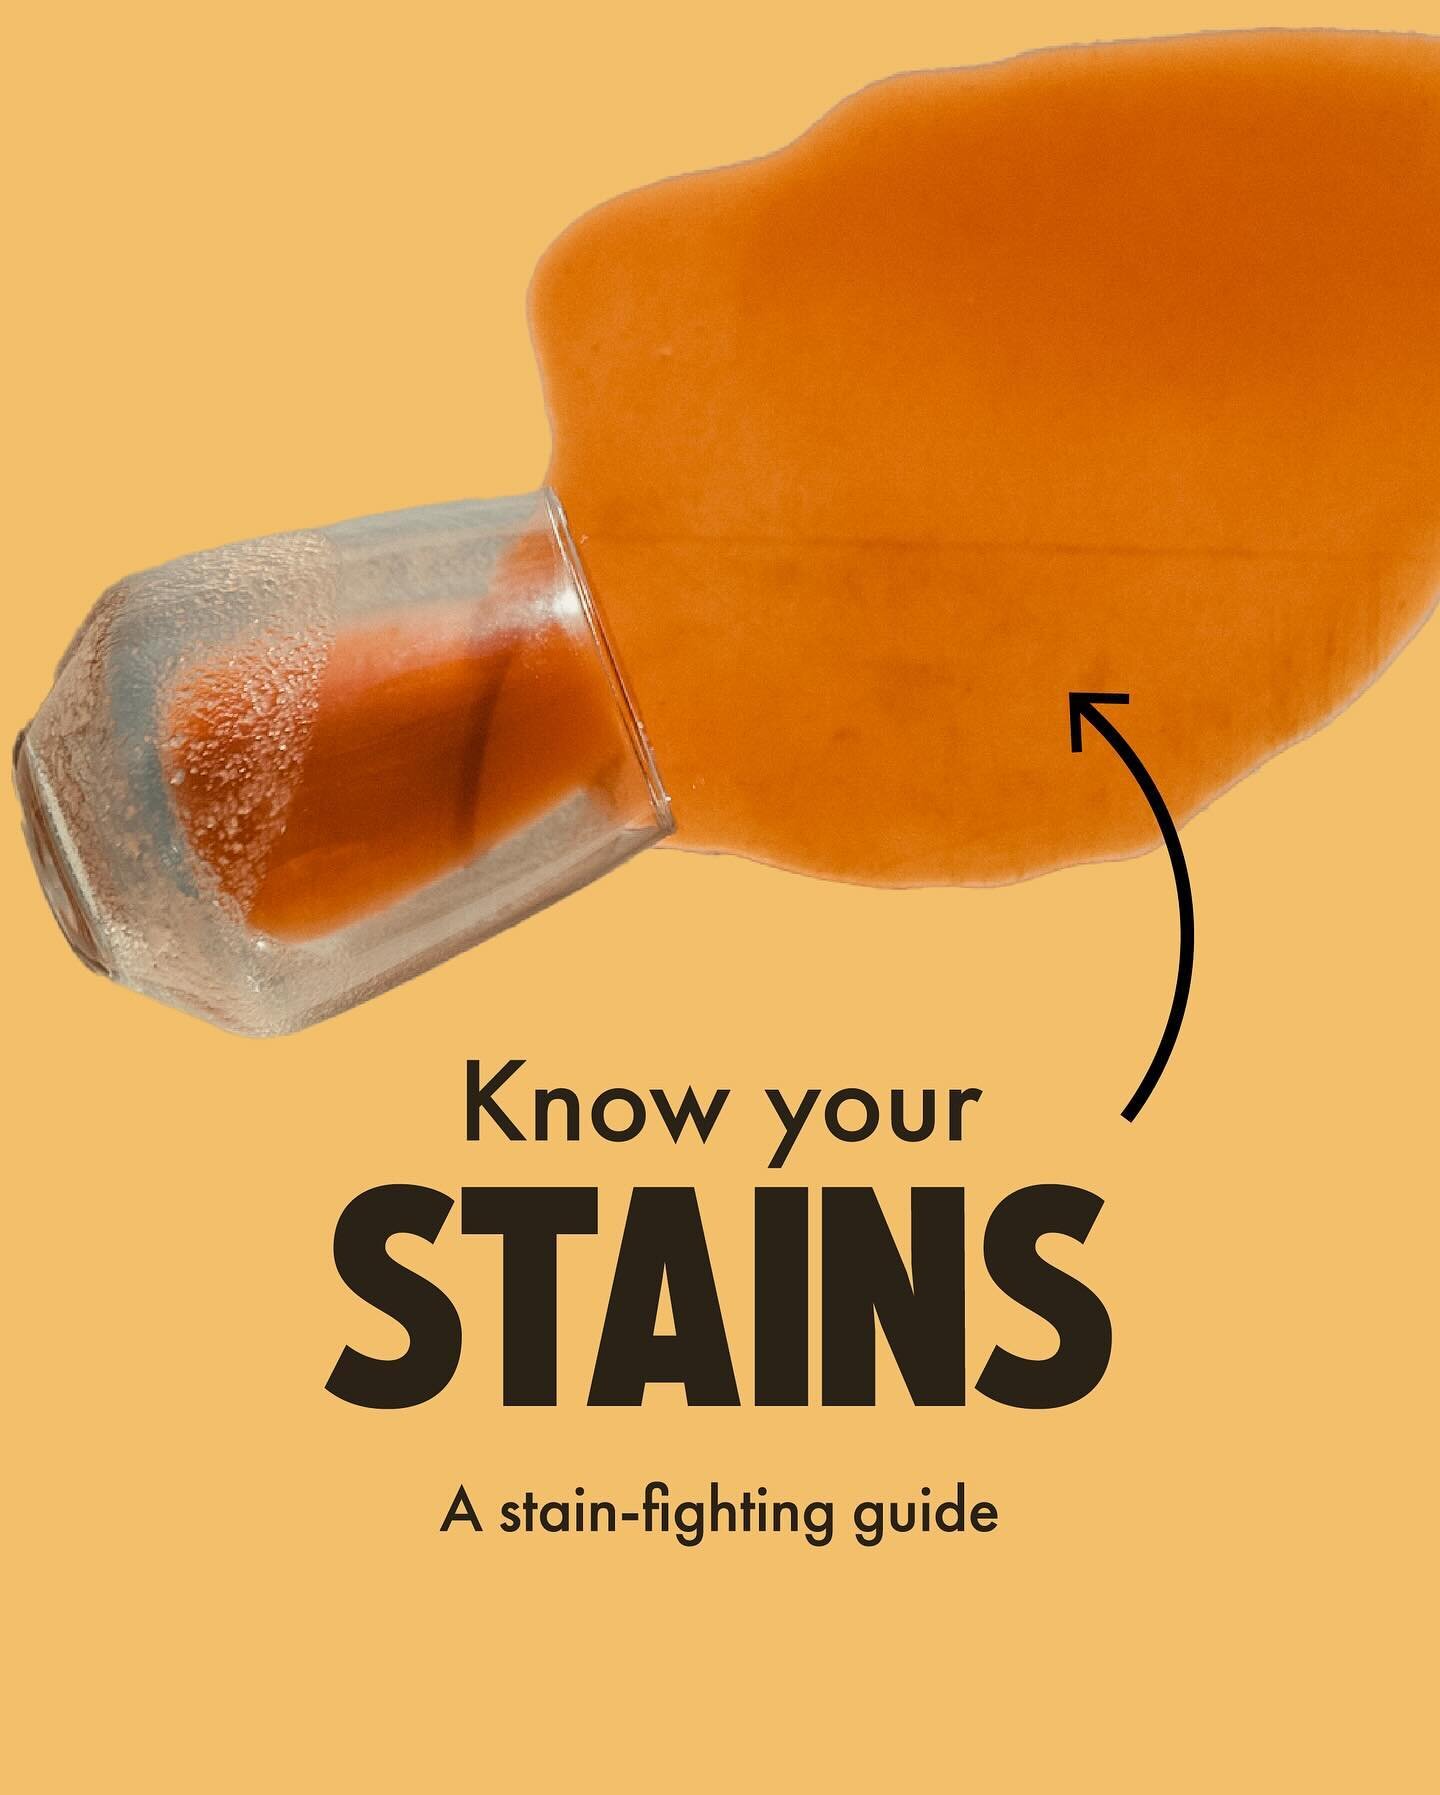 Spilled again? 🍷 No worries! Star Laundromats has your back with pro tips for every stain type. Swipe to master the art of battling blood, beating grease, and conquering color.